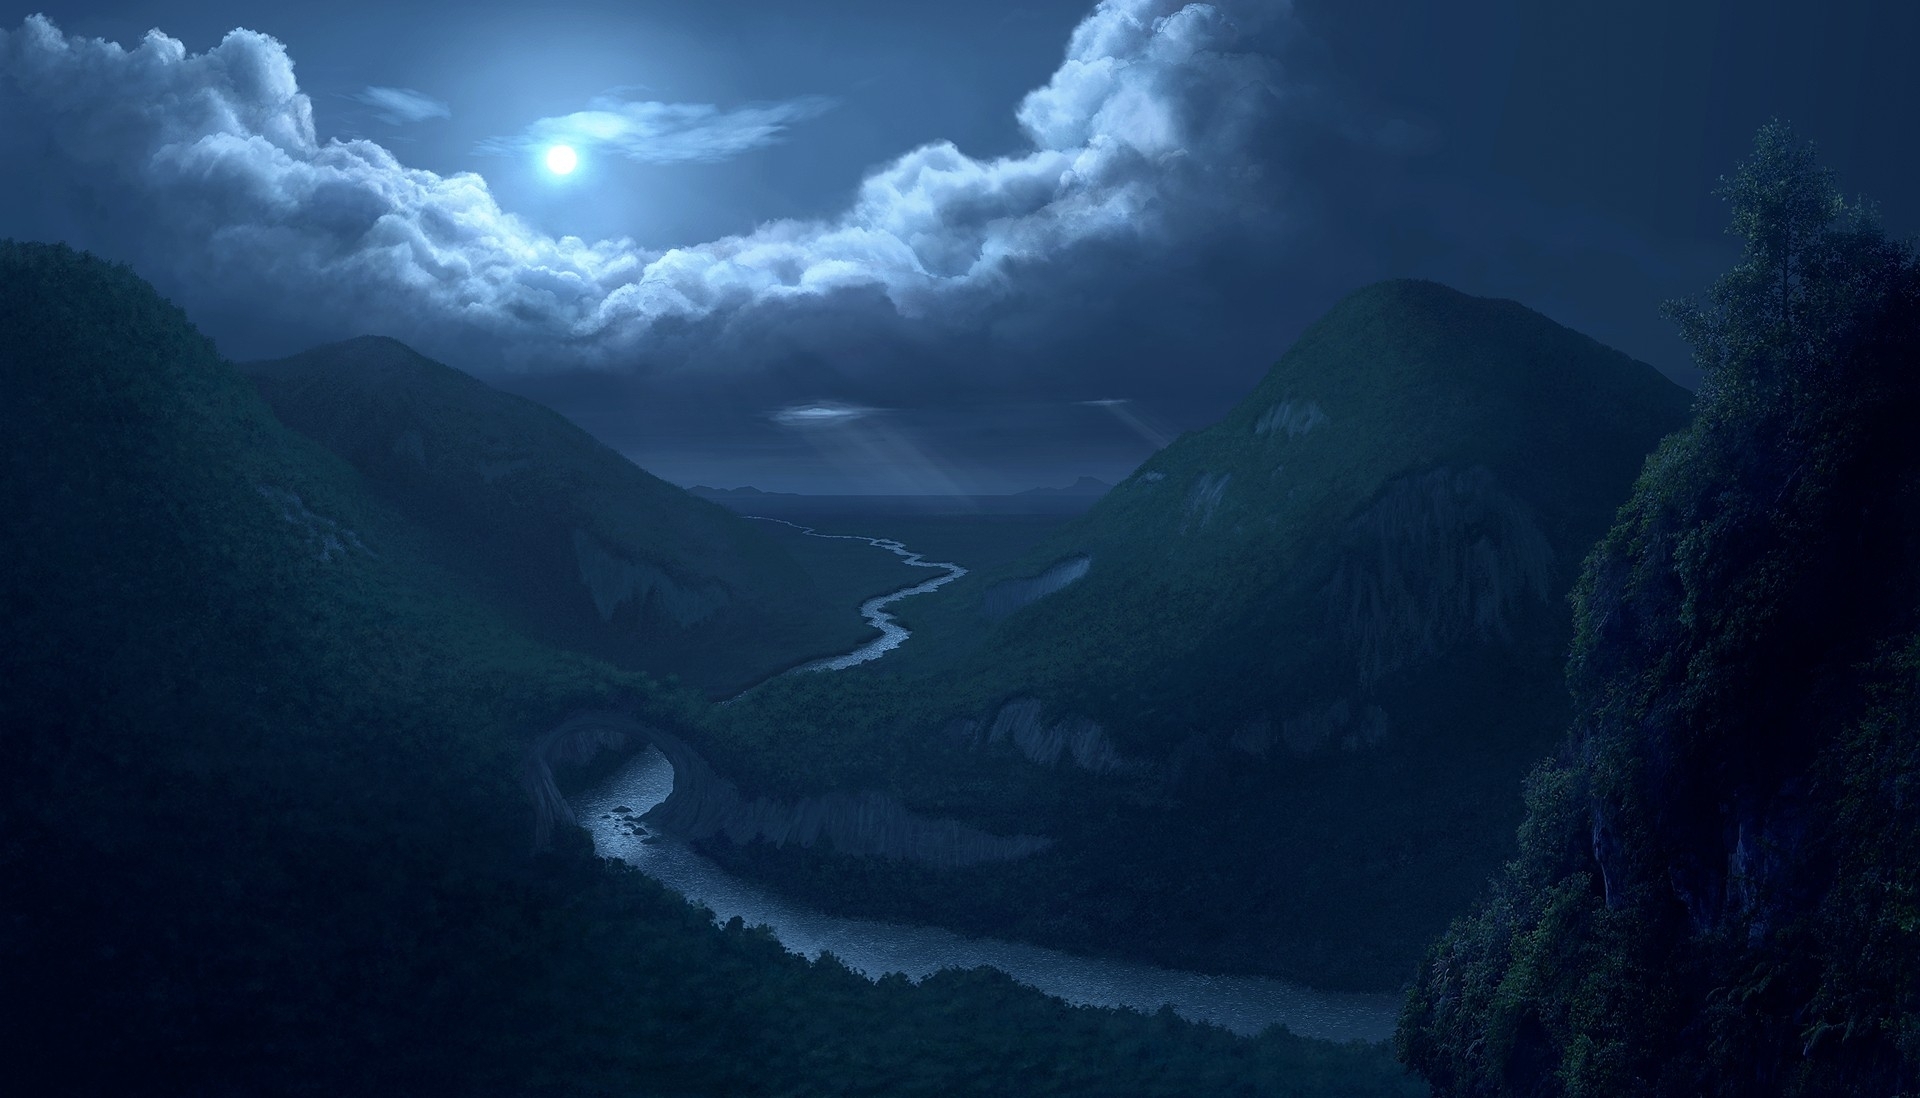 cg, Digital, Art, Nature, Landscapes, Rivers, Valley, Mountains, Trees, Forest, Woods, Night, Sky, Moon, Clouds, Reflection Wallpaper